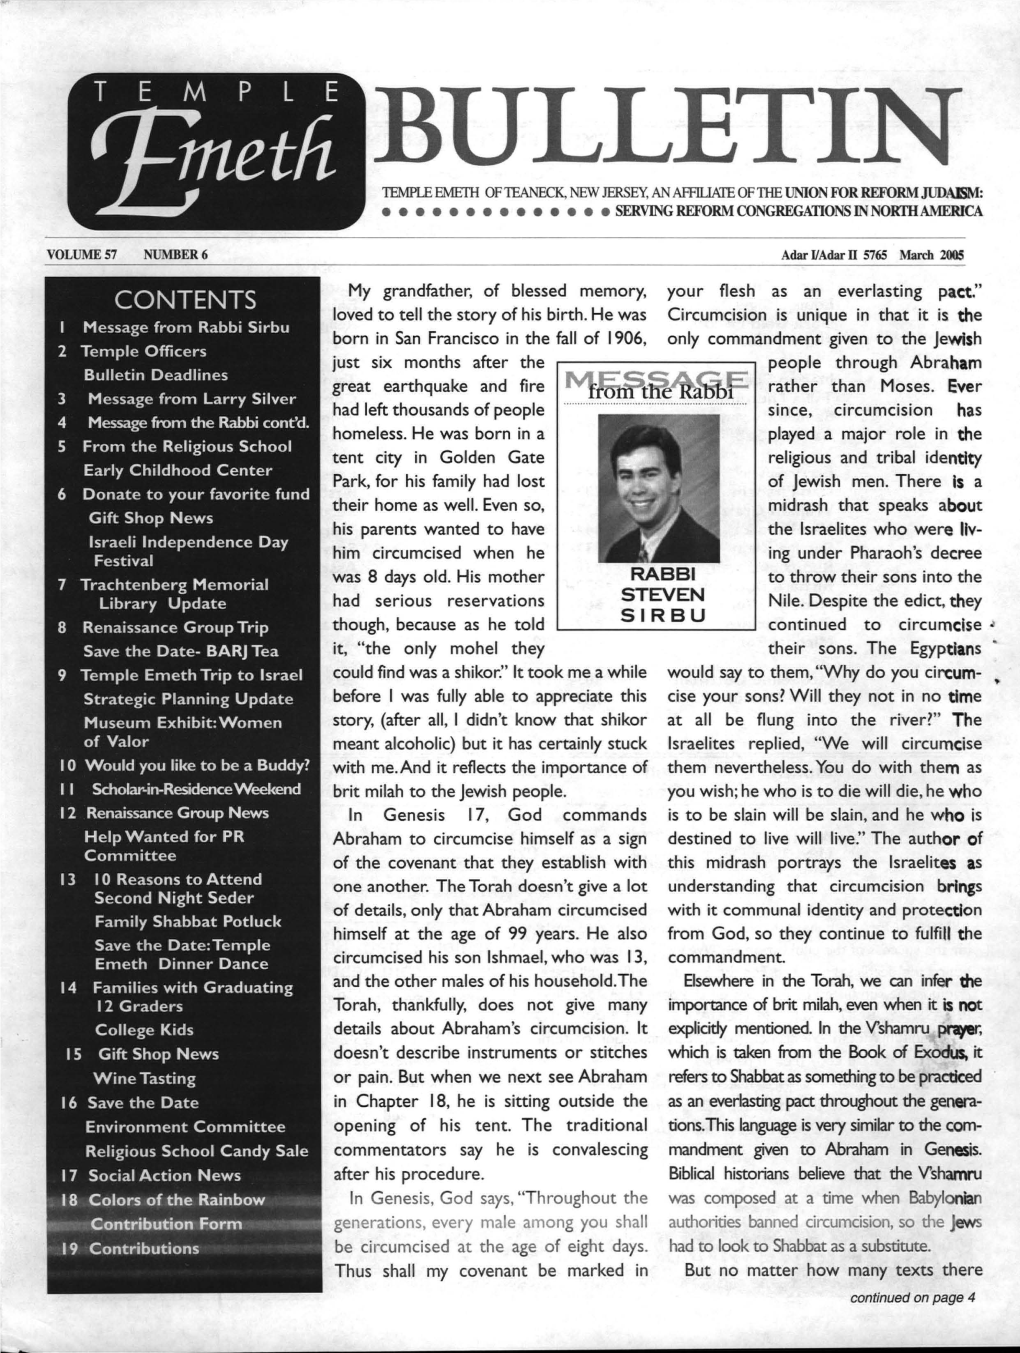 BULLETIN TEMPLE Emelh OF1EANECK, NEW JERSEY, an Affiliate of 1HE UNION for REFORM JUDA&D: • • •••••••••••• SERVING REFORM CONGREGATIONS in NOR1HAMERICA